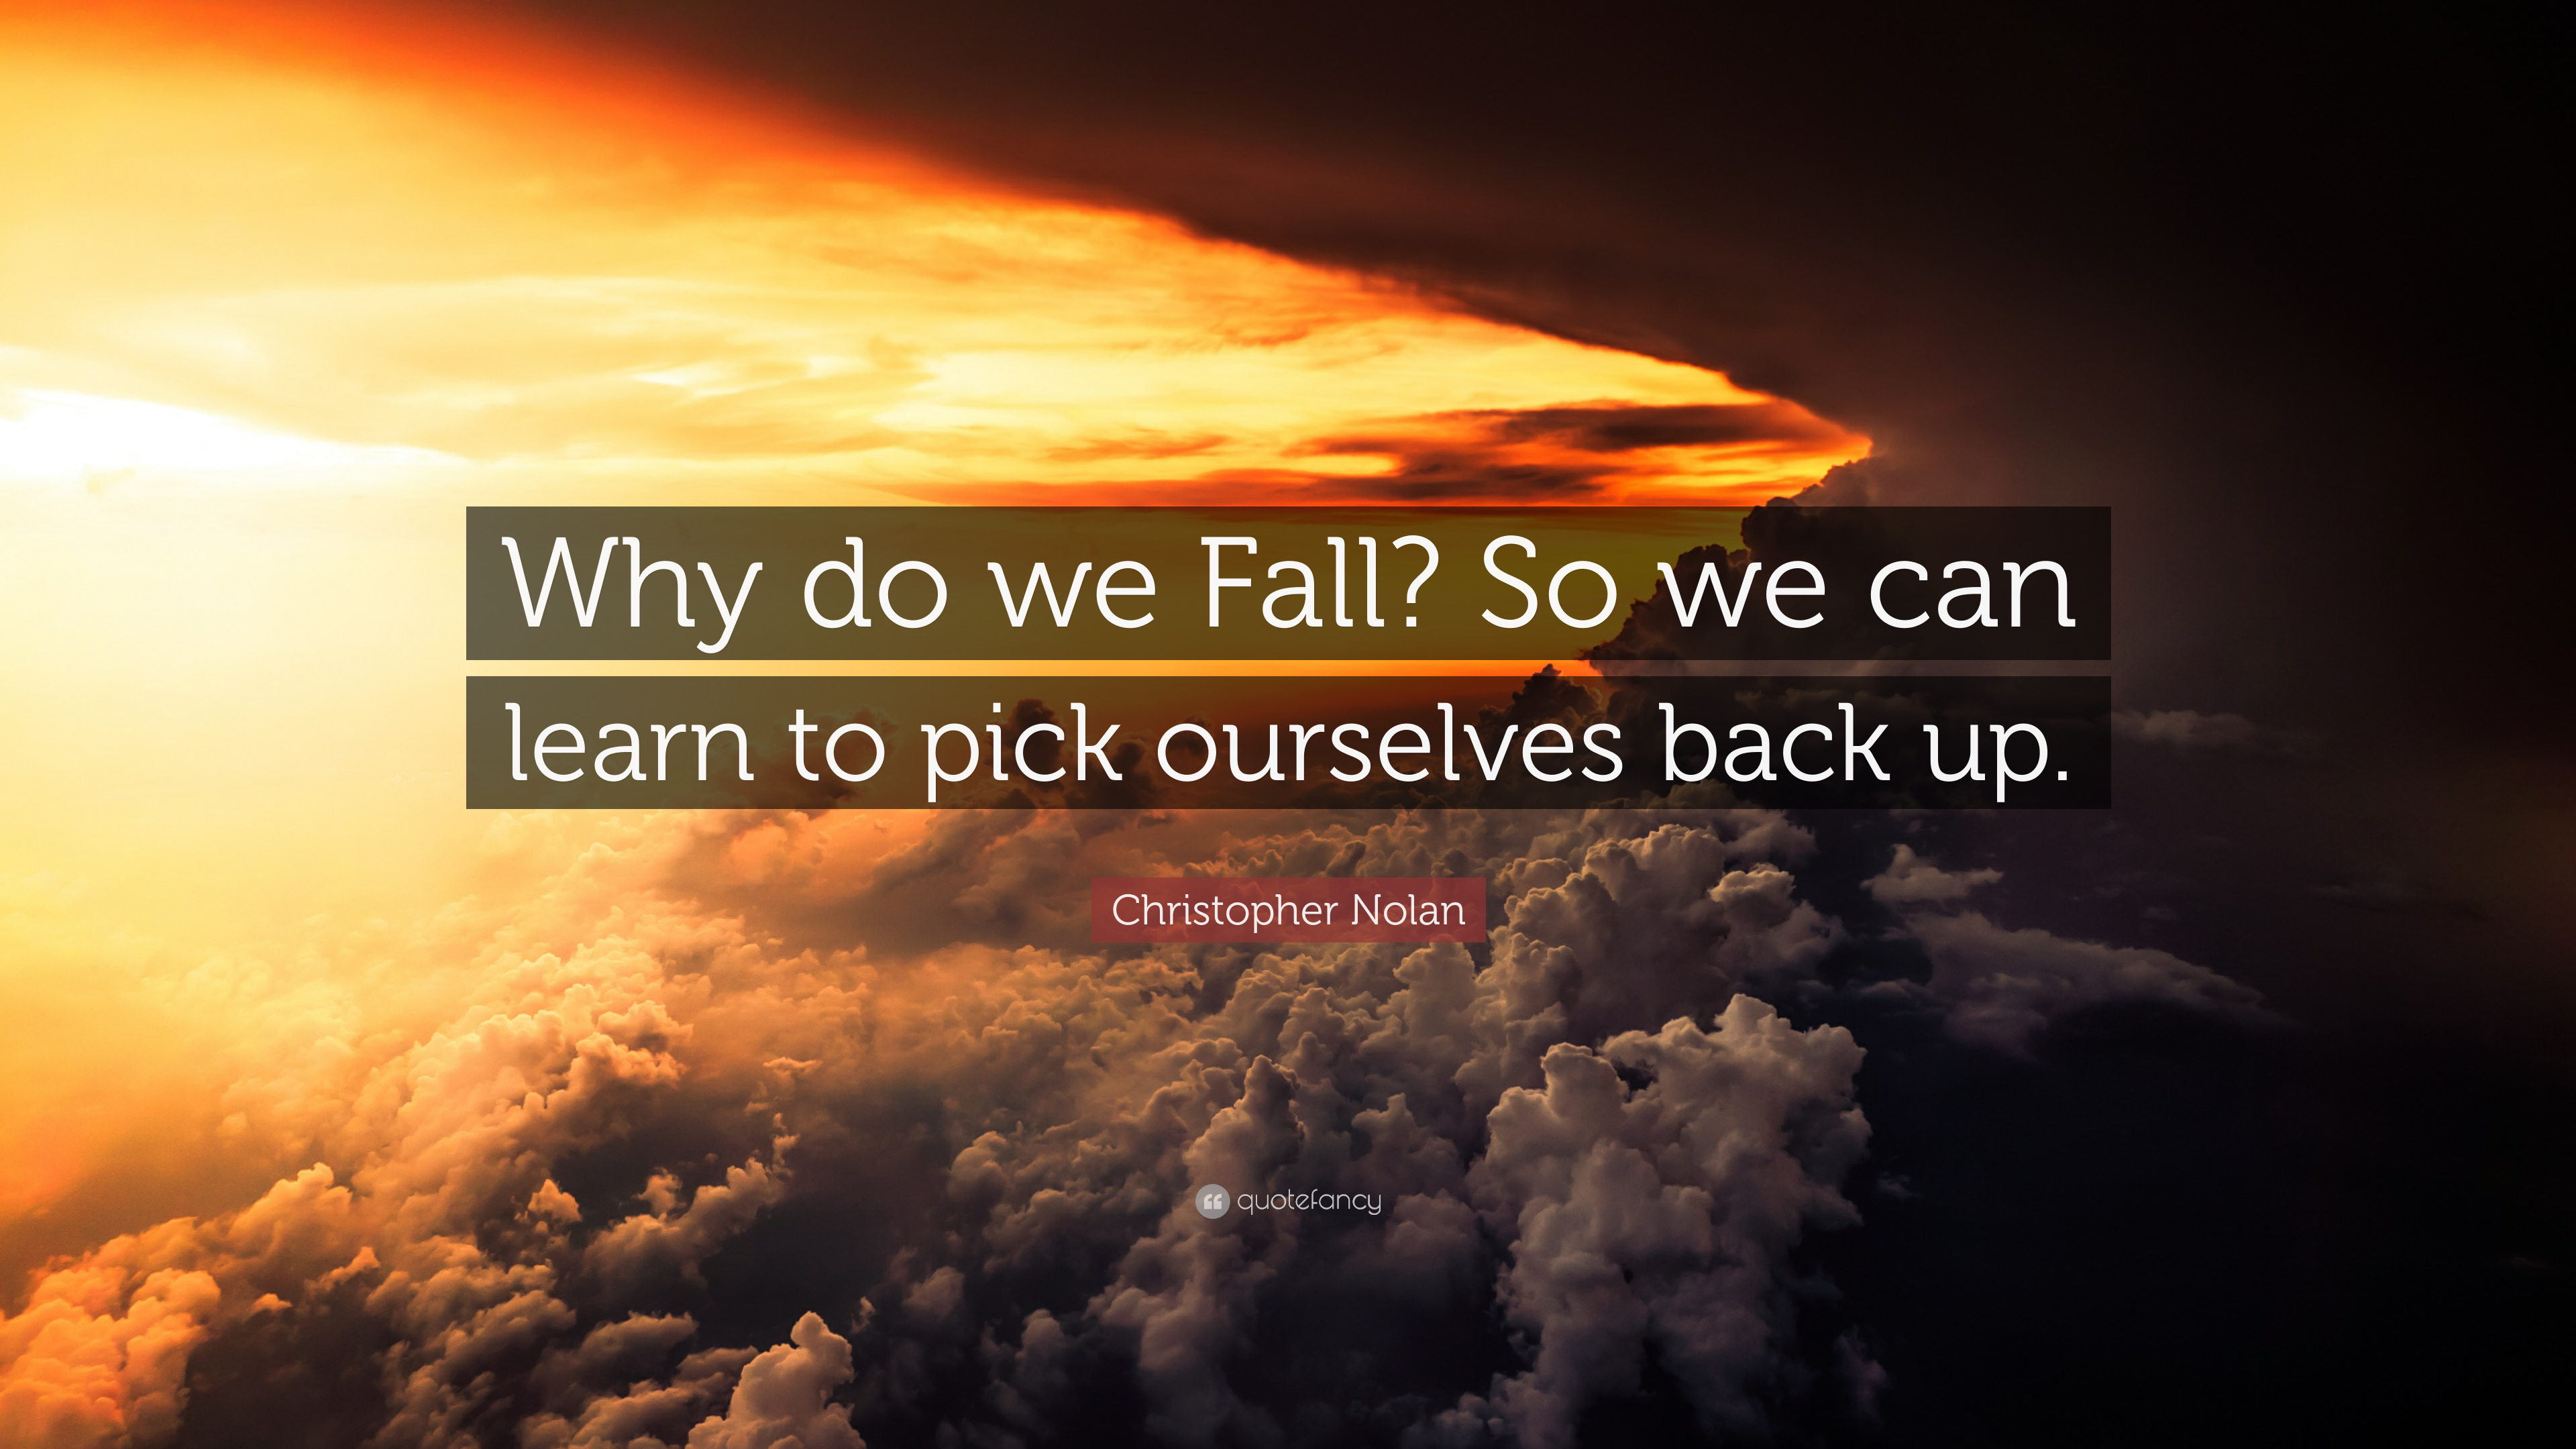 Christopher Nolan Quote: “Why do we Fall? So we can learn to pick ourselves back up.”